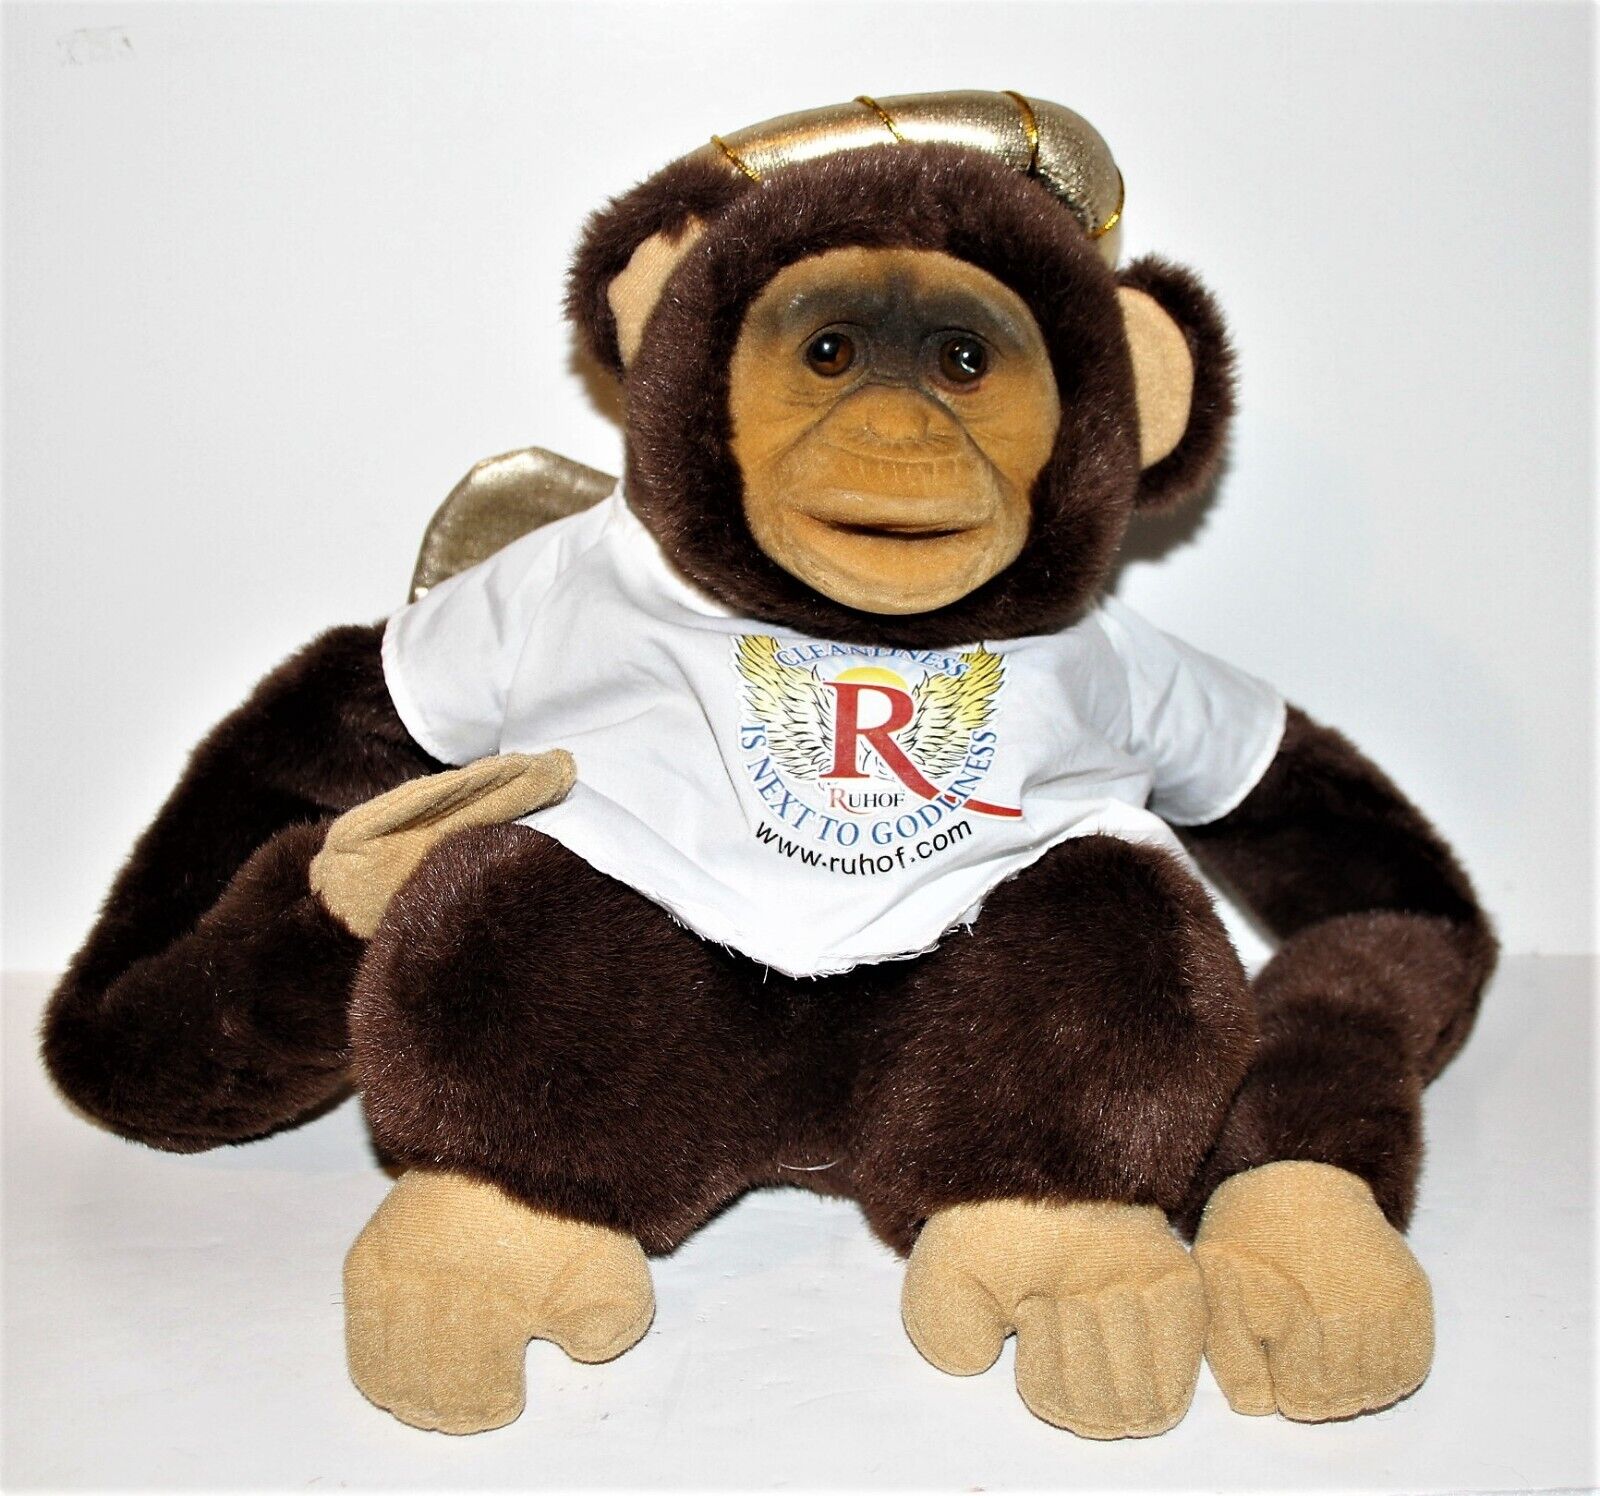 RUHOF Monkey HAND PUPPET 15" Plush in ANGEL costume w/Gold Halo & Wings SQUEAKER